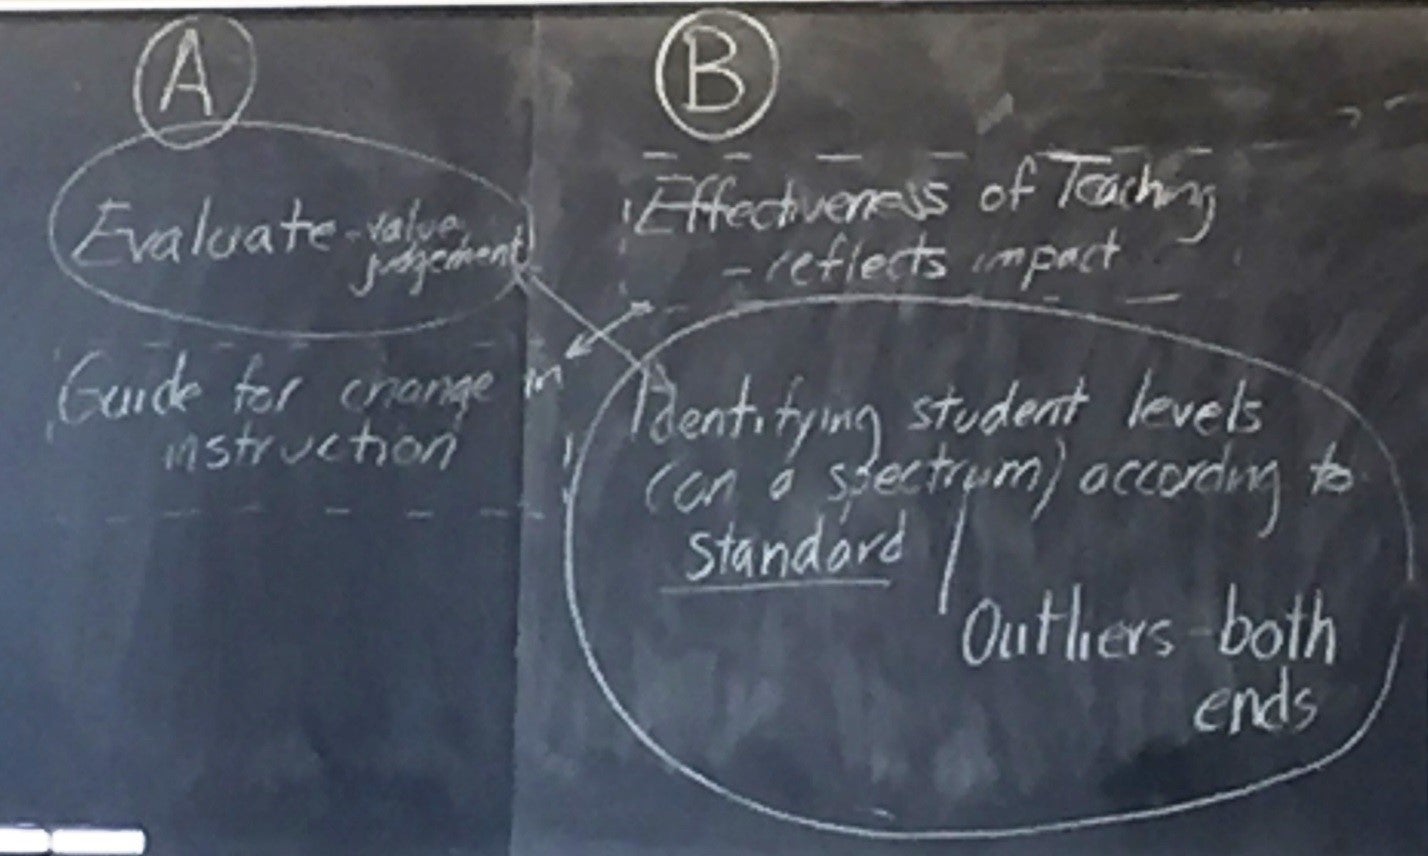 Blackboard with the workshop groups' common themes: Group A identified evaluate value judgement, and a guide for change in instruction, and Group B identified effectiveness of teaching reflects impact, and identifying student levels on a spectrum according to a standard (outliers at both ends)